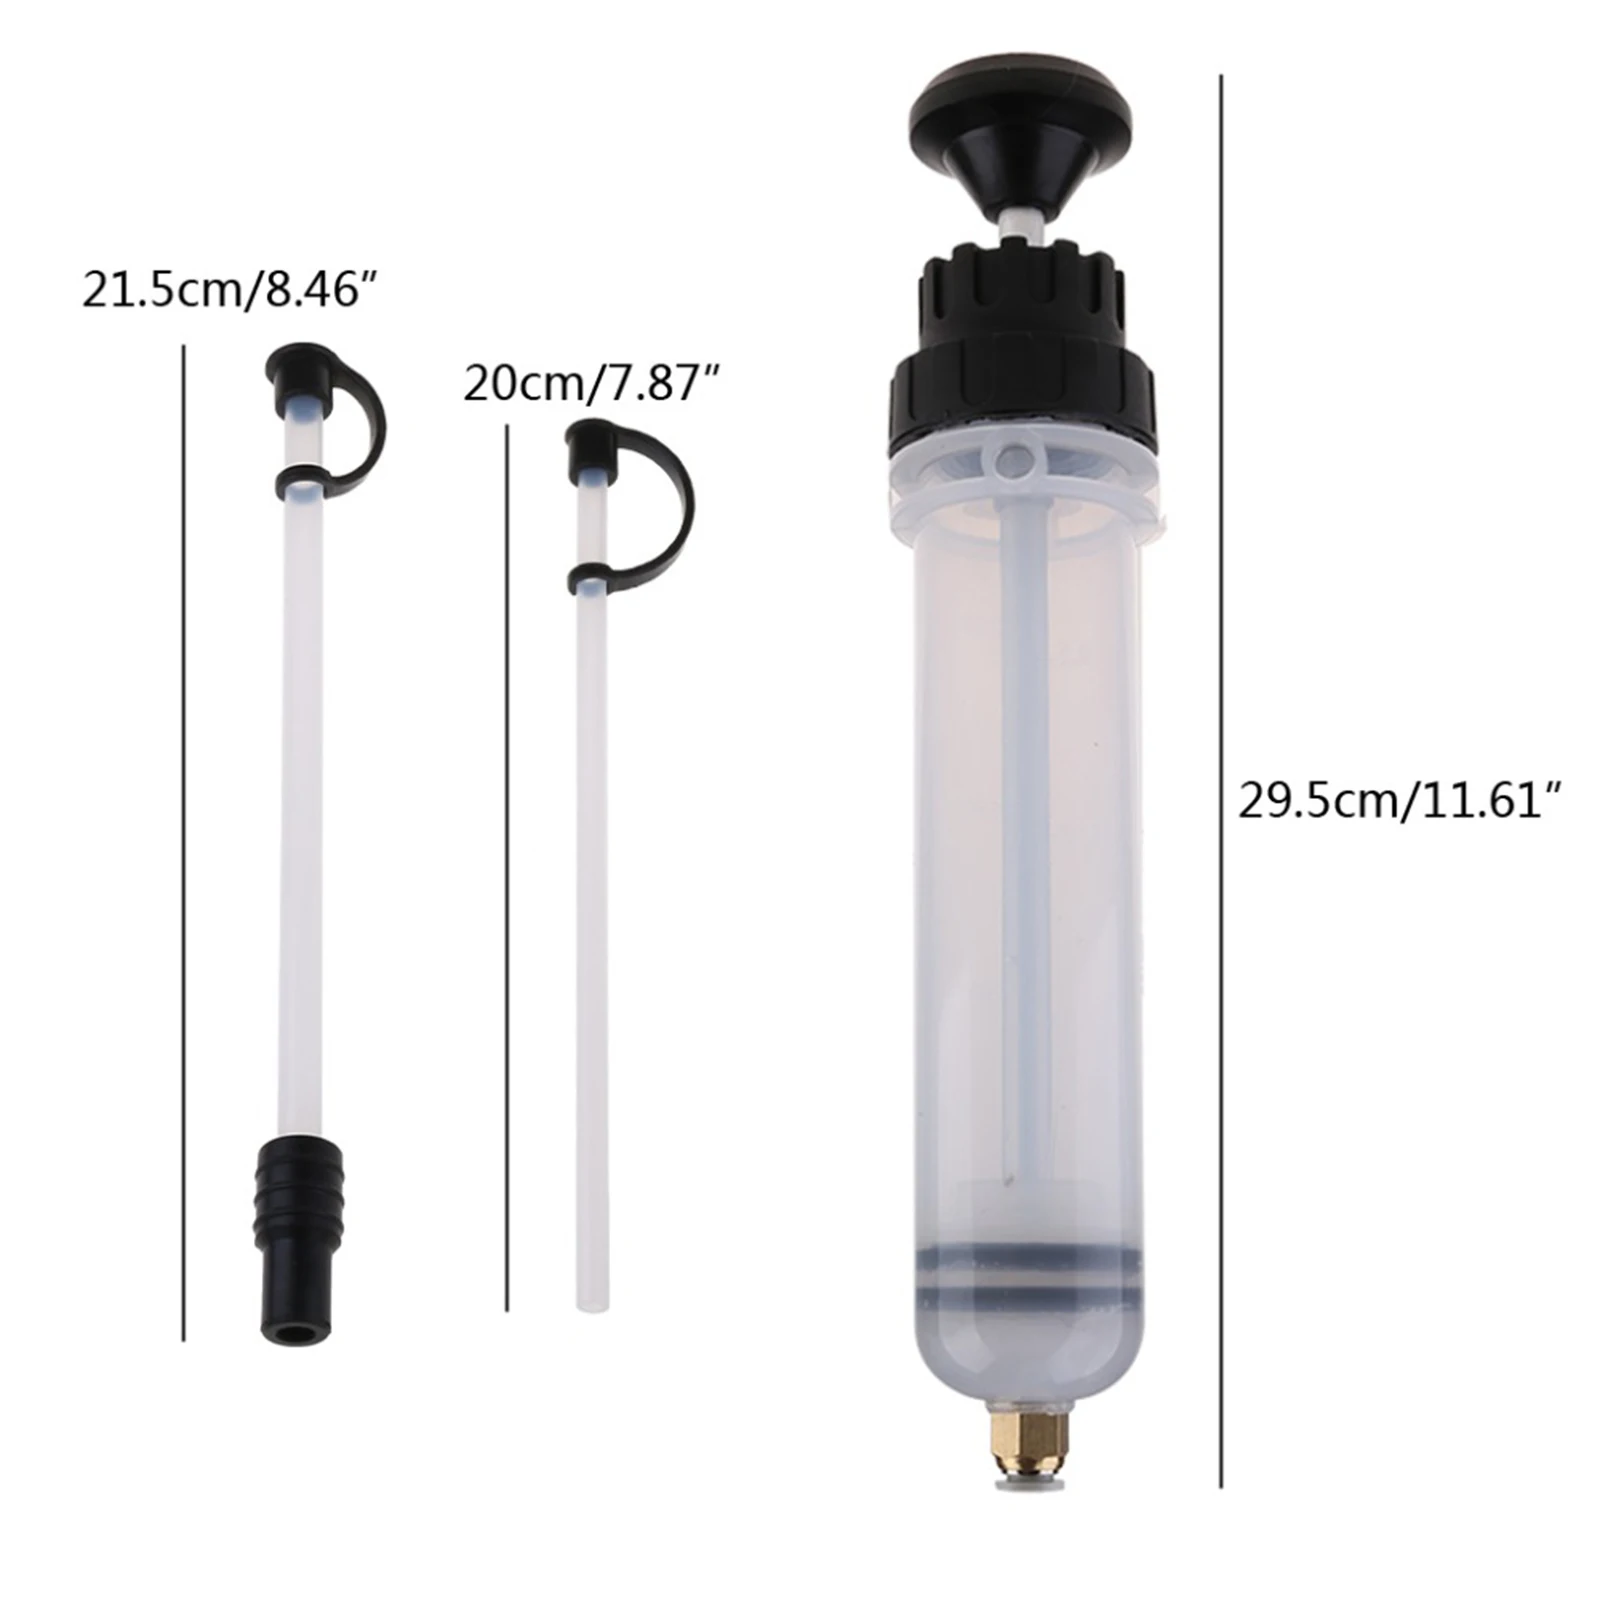 200cc Oil Fluid Extractor, Filling Syringe Pump Manual Suction Vacuum Fuel,for Cars, Brake Fluid Removal